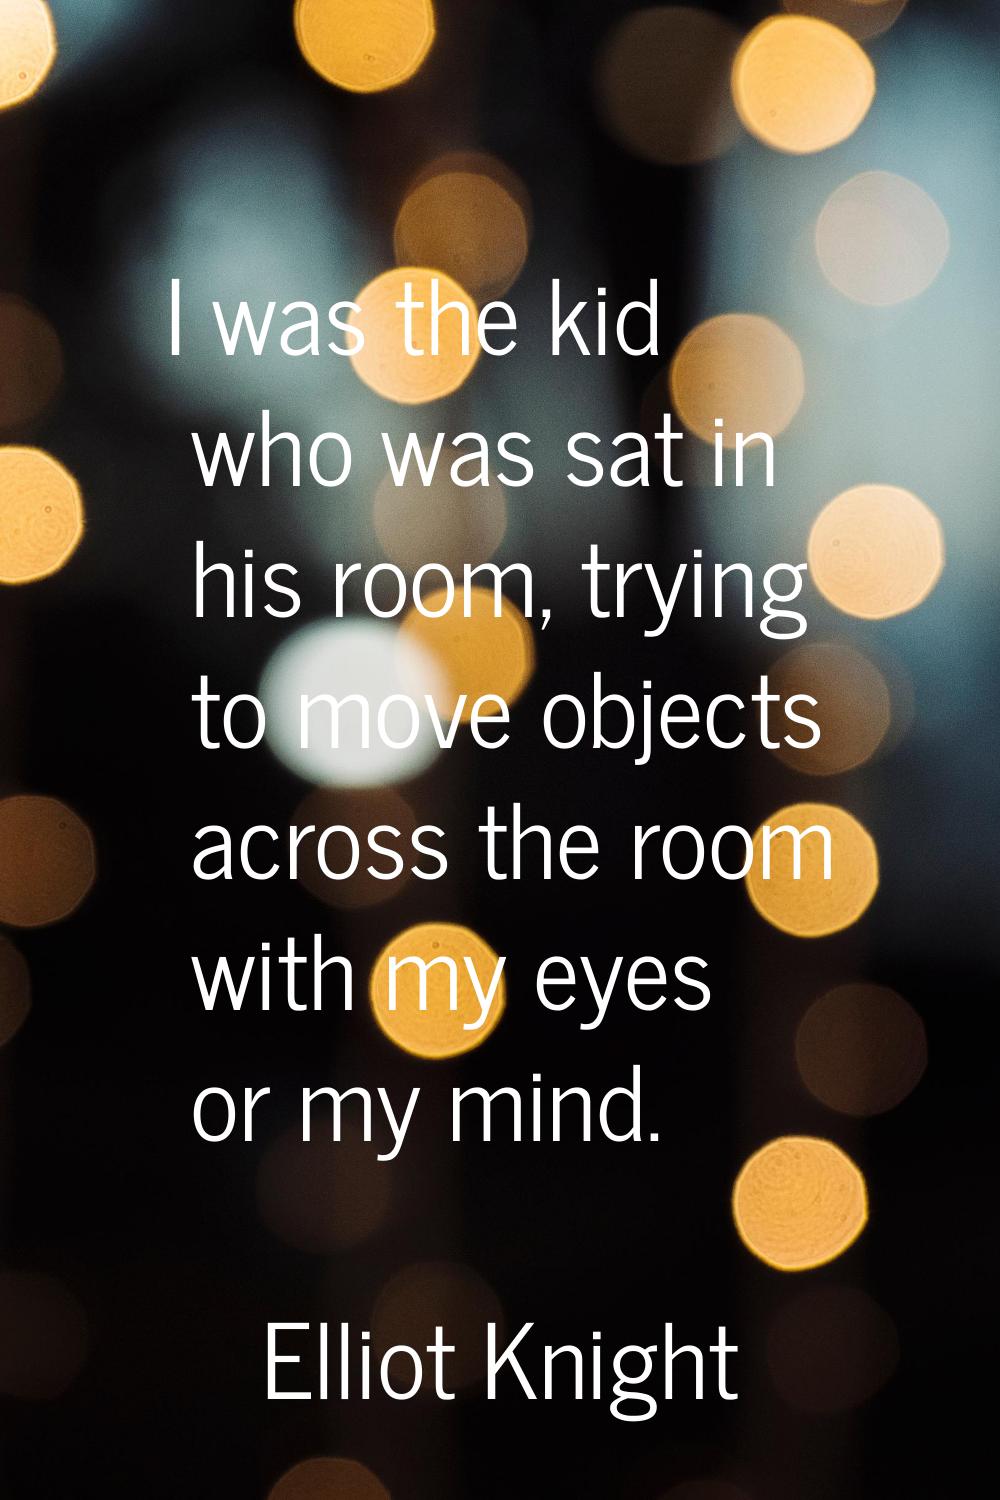 I was the kid who was sat in his room, trying to move objects across the room with my eyes or my mi